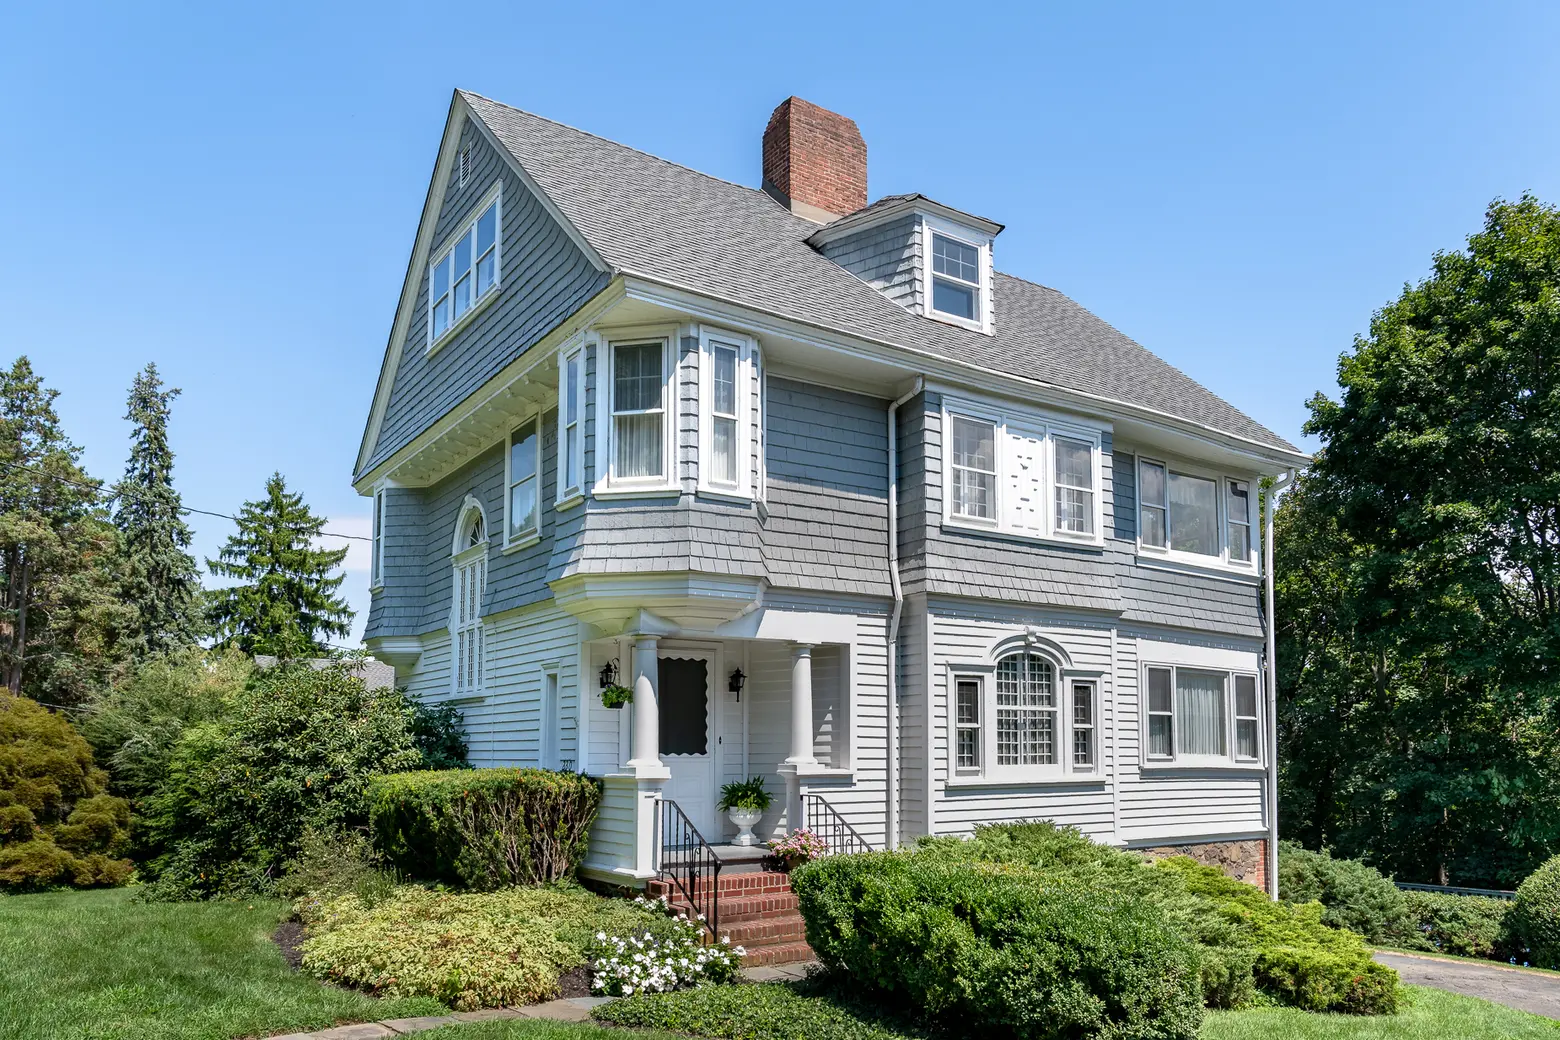 In Rockland County, this $1.3M Colonial home was designed by Stanford White